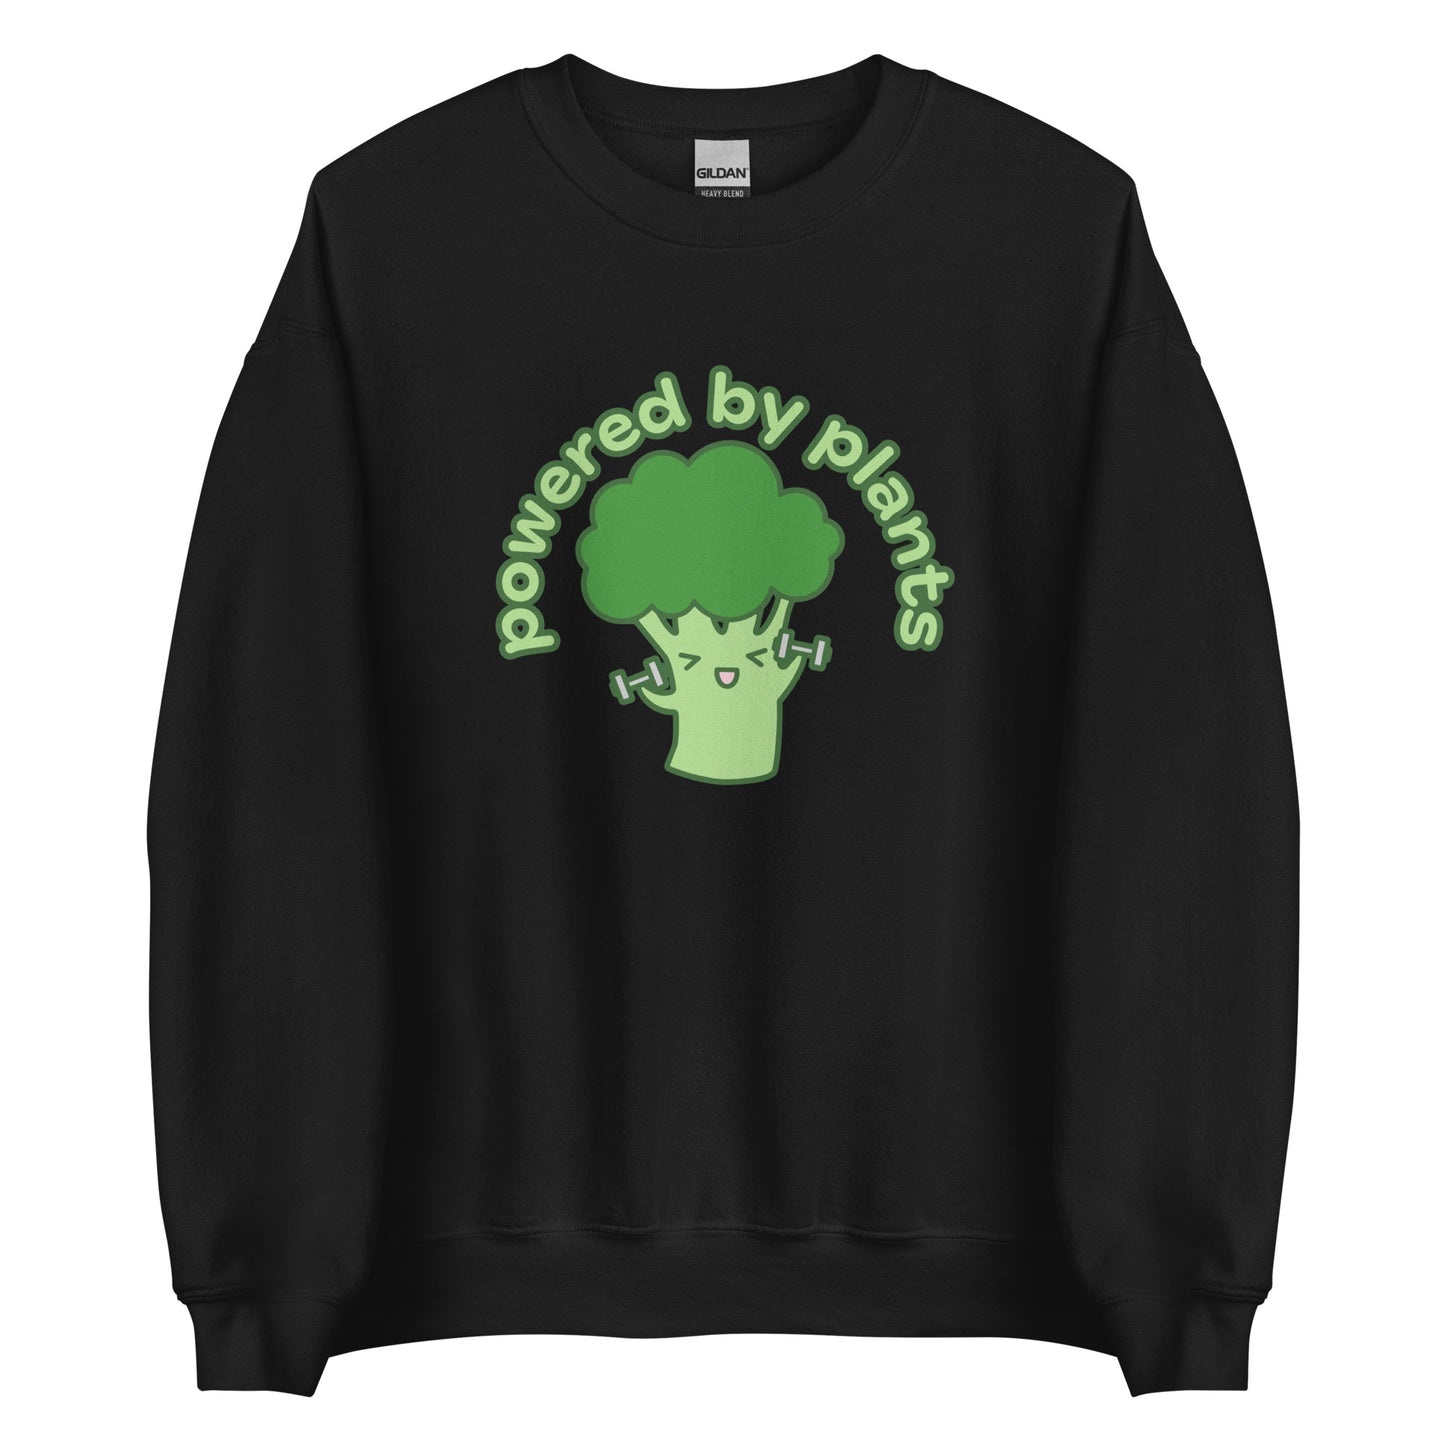 A black crewneck sweatshirt featuring an illustration of a cartoon broccoli character. The broccoli is excitedly lifting weights, and text in an arc above the broccoli reads "powered by plants".